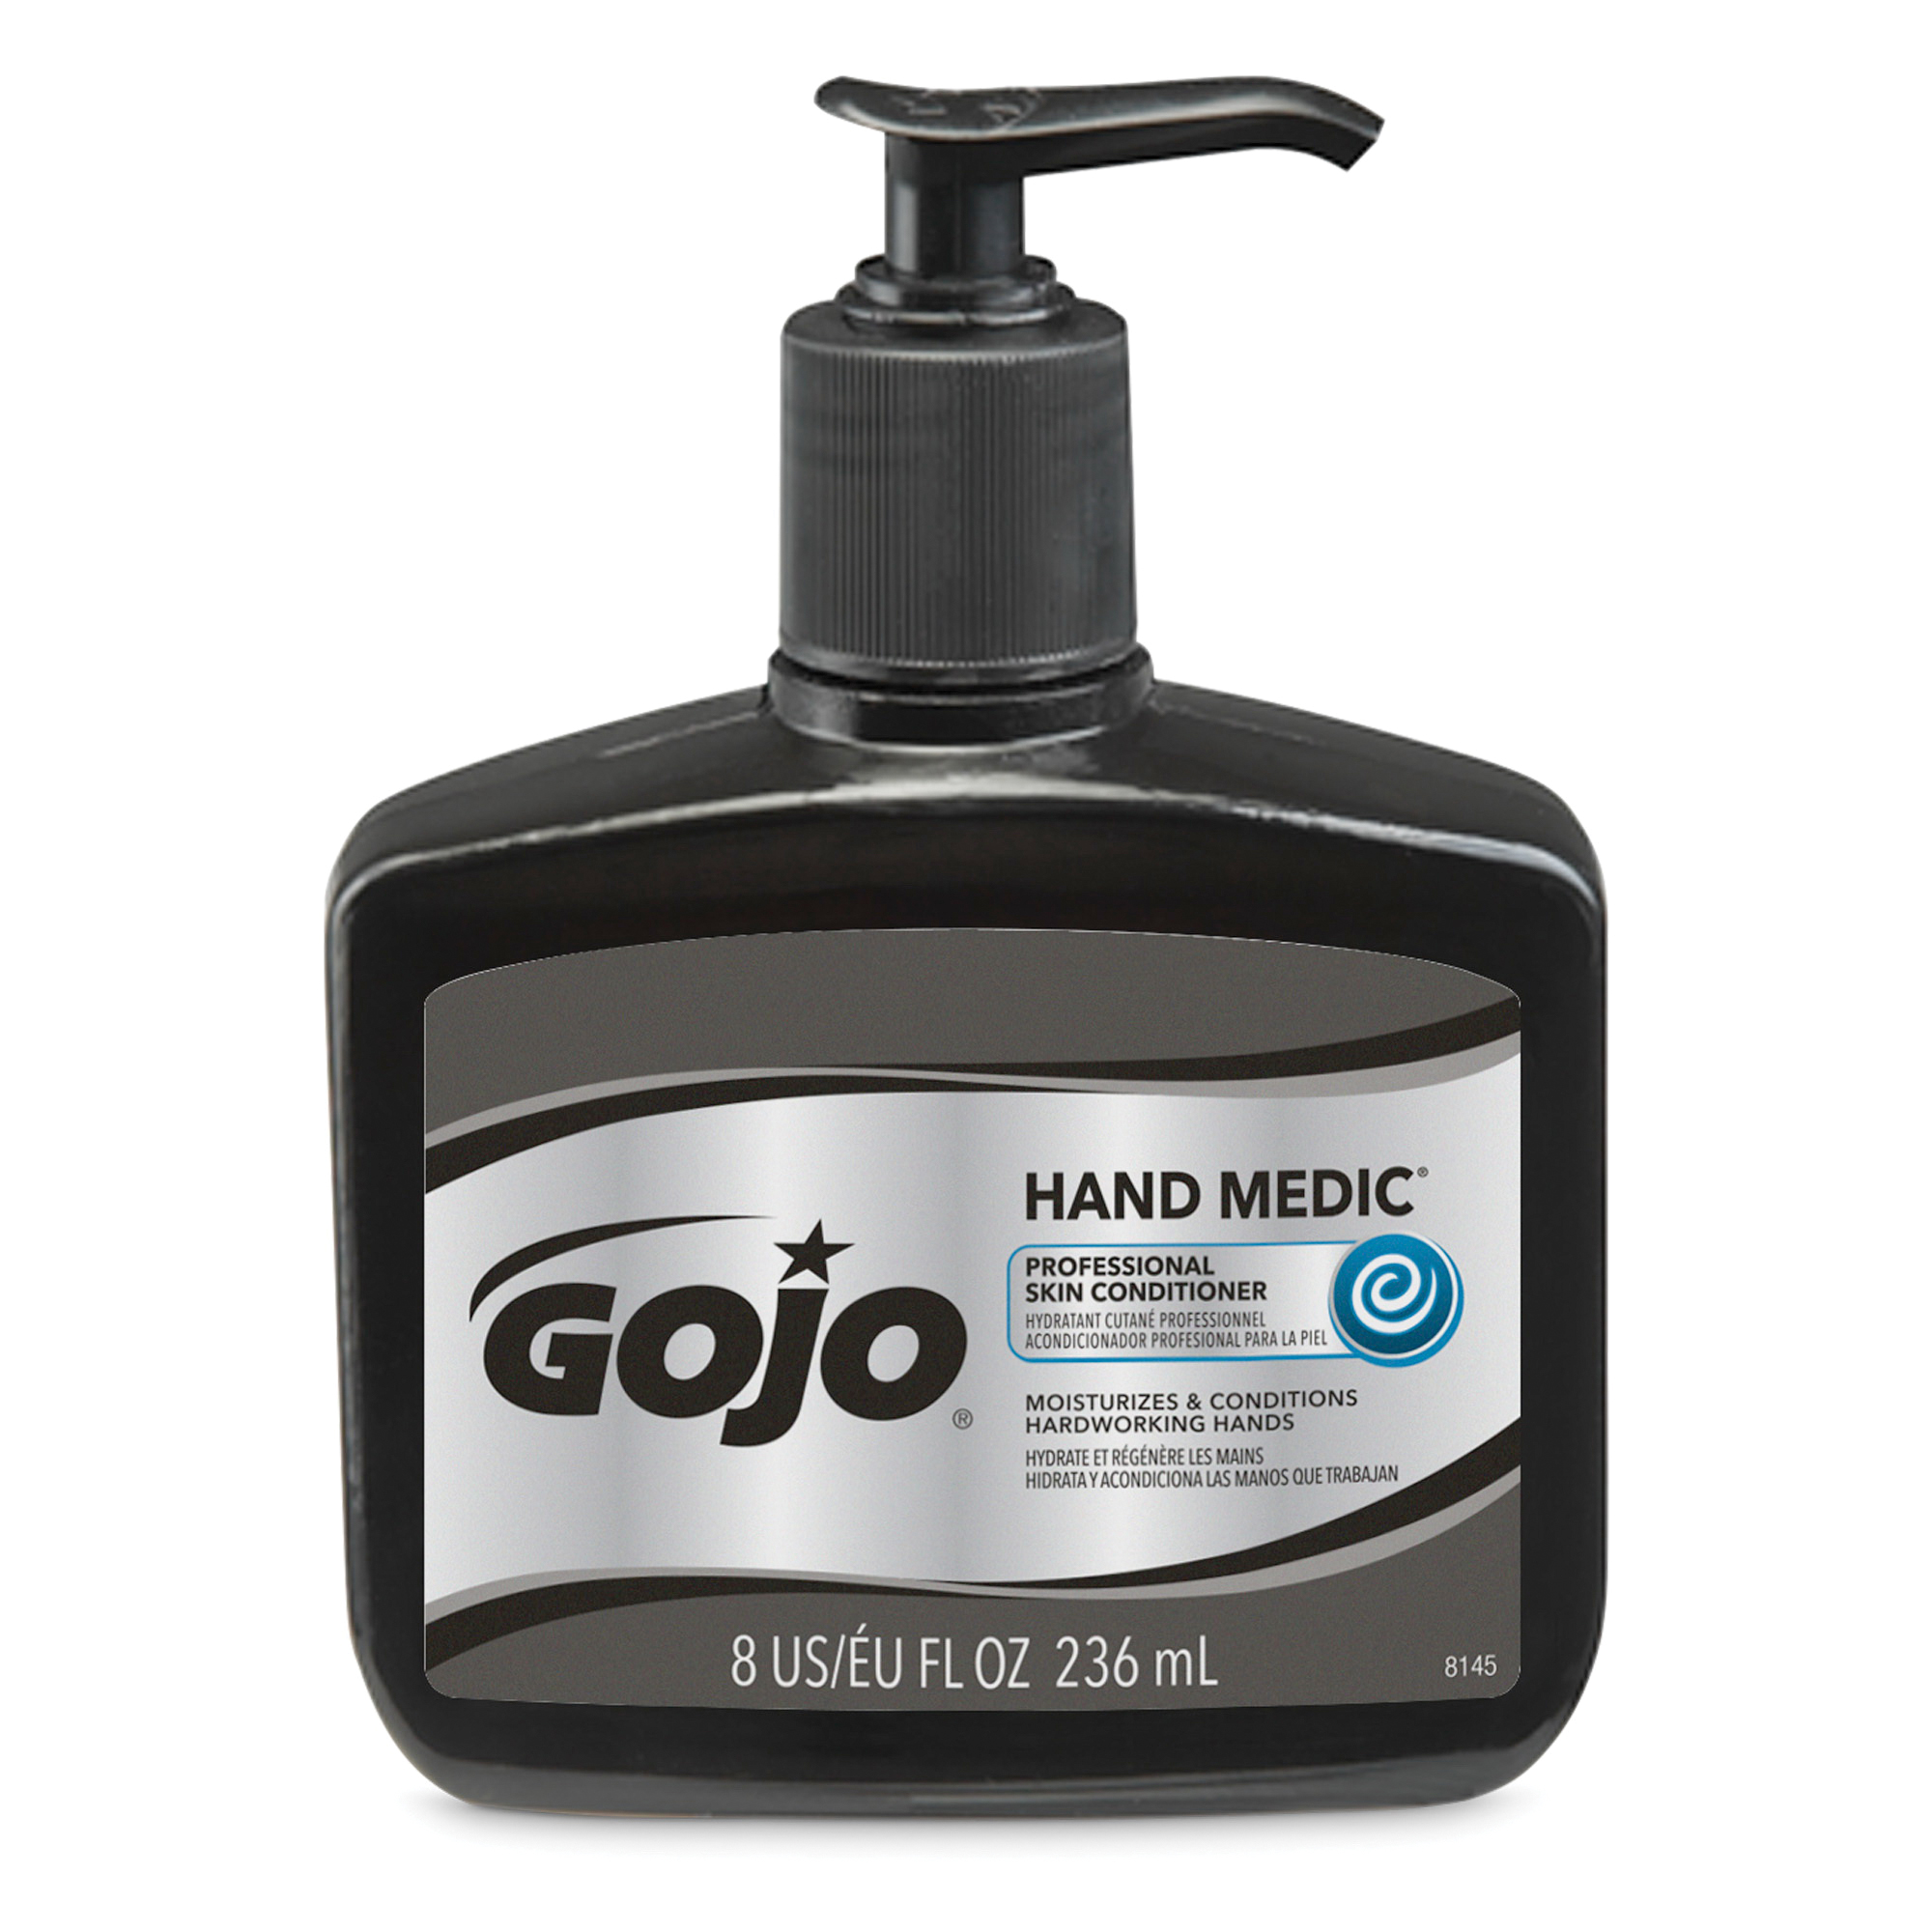 GOJO® 8145-06 HAND MEDIC® Professional Skin Conditioner, 8 fl-oz Nominal, Bottle Package, Lotion Form, Fragrance-Free Odor/Scent, Opaque/White